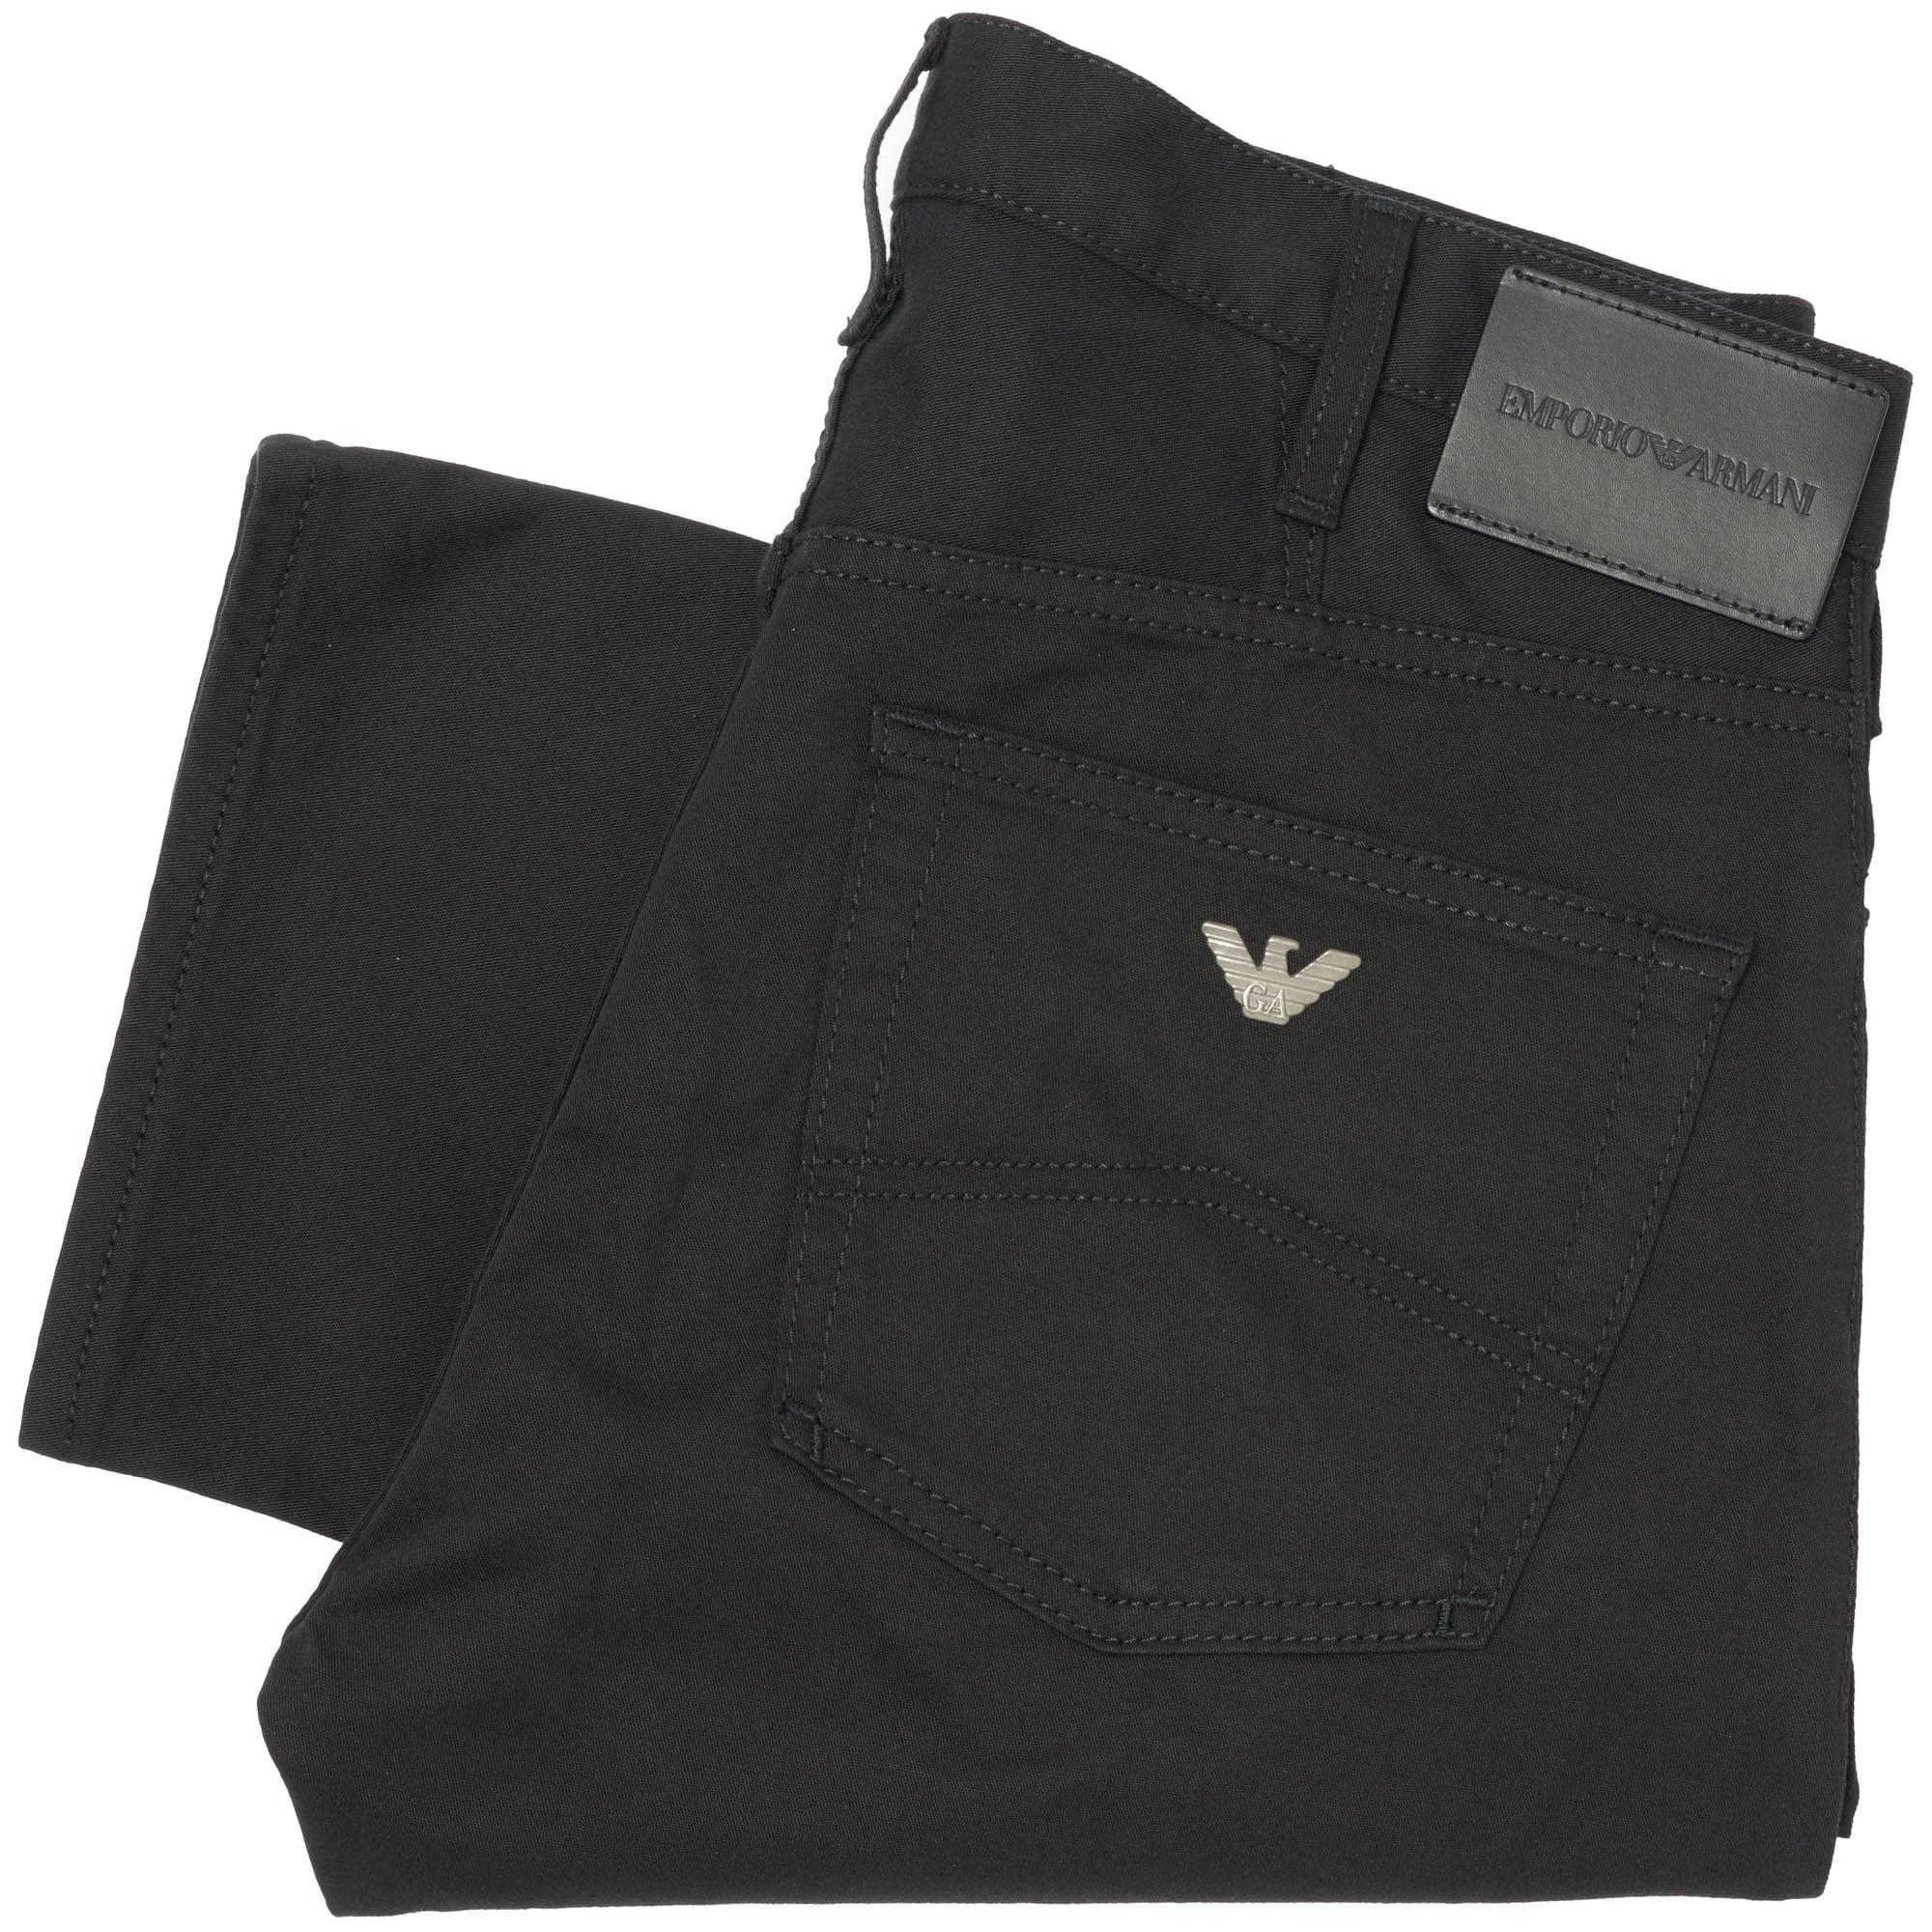 Emporio Armani Denim J21 Jeans Style Chinos in Black for Men - Lyst